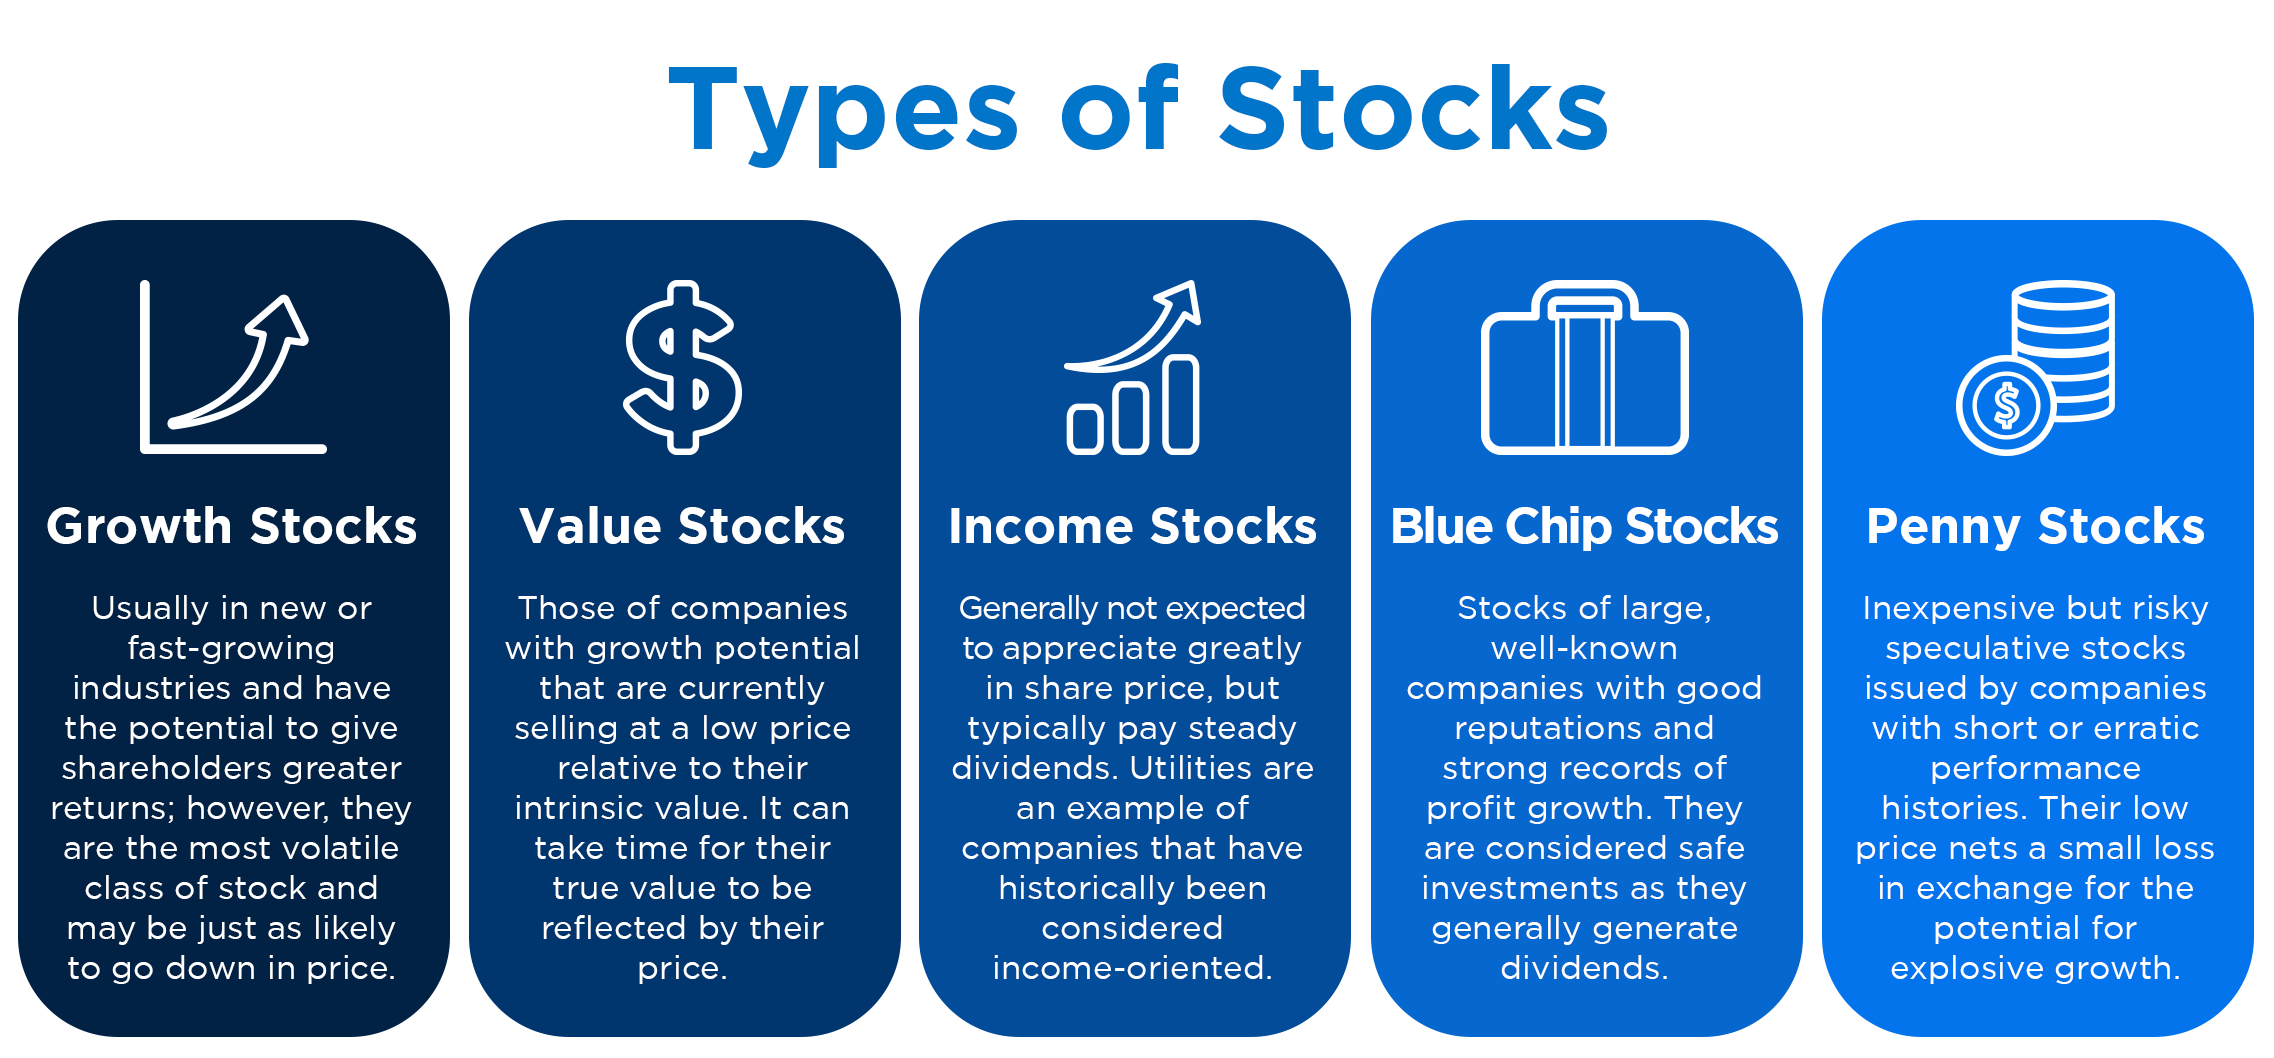 5 Different Types of Stocks